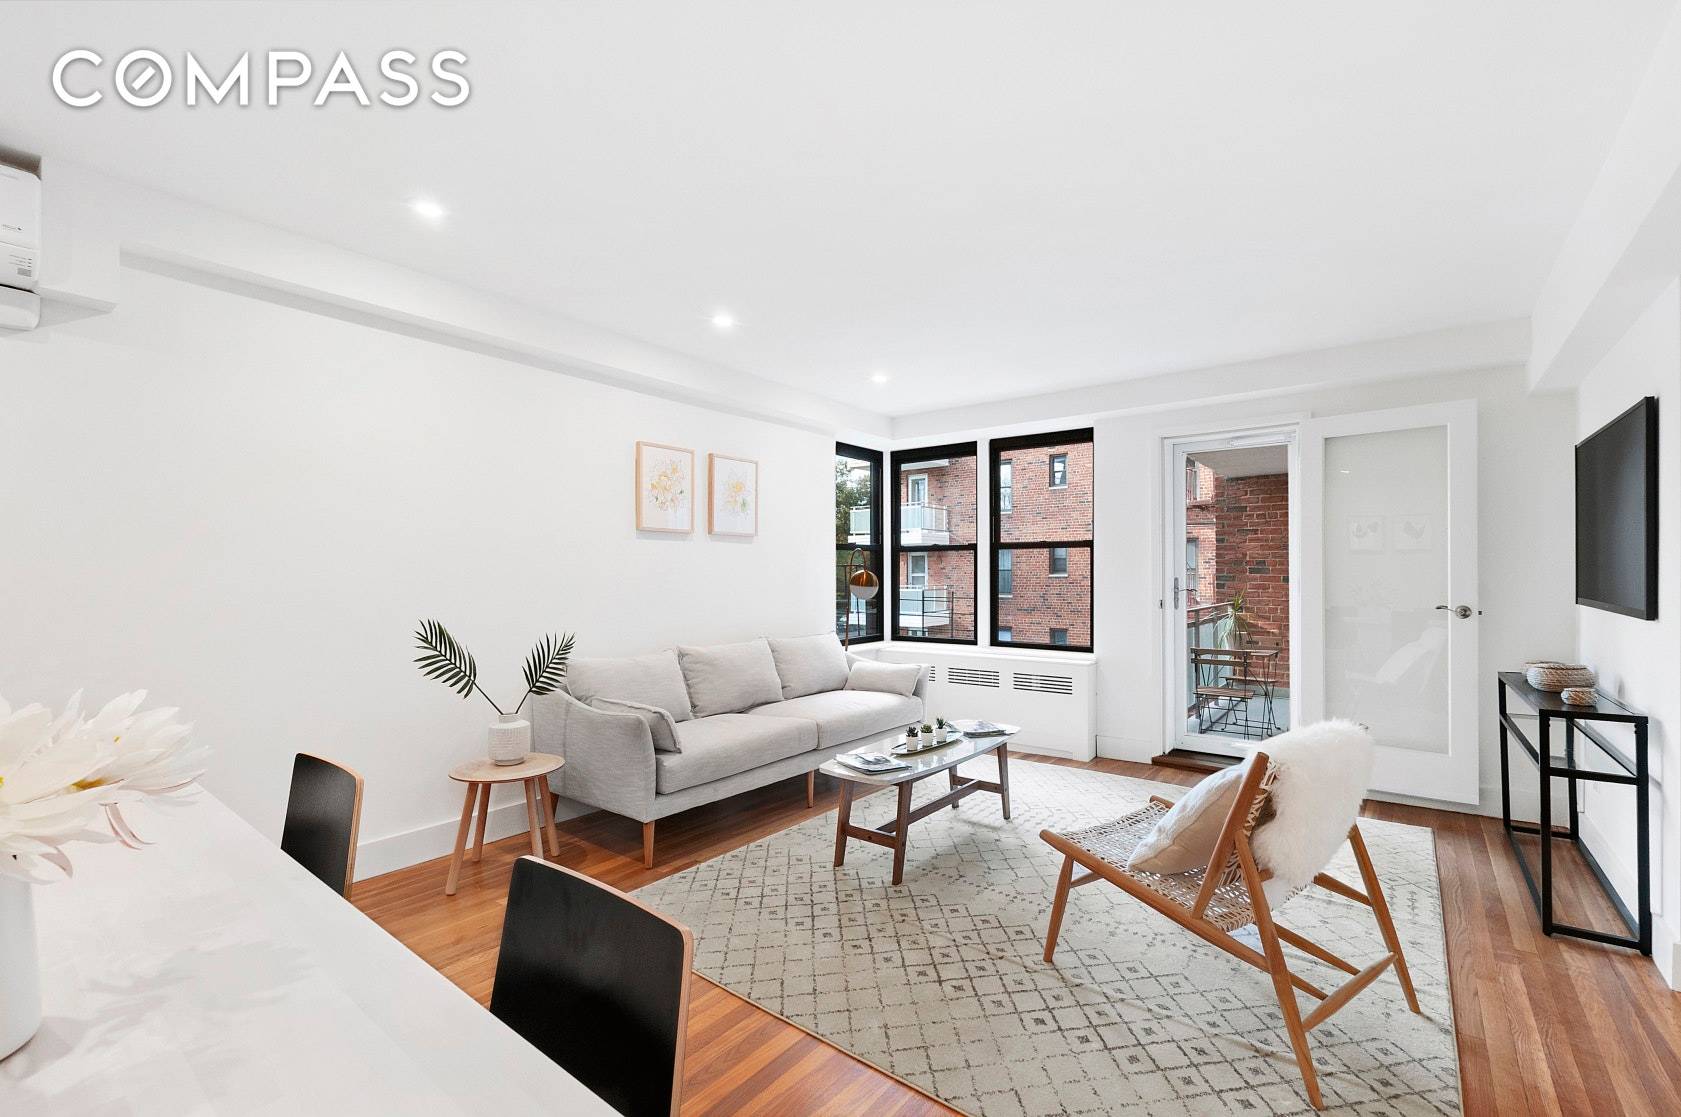 Classic and modern blissfully unite on this newly gut renovated three bed, two bath with private terrace.